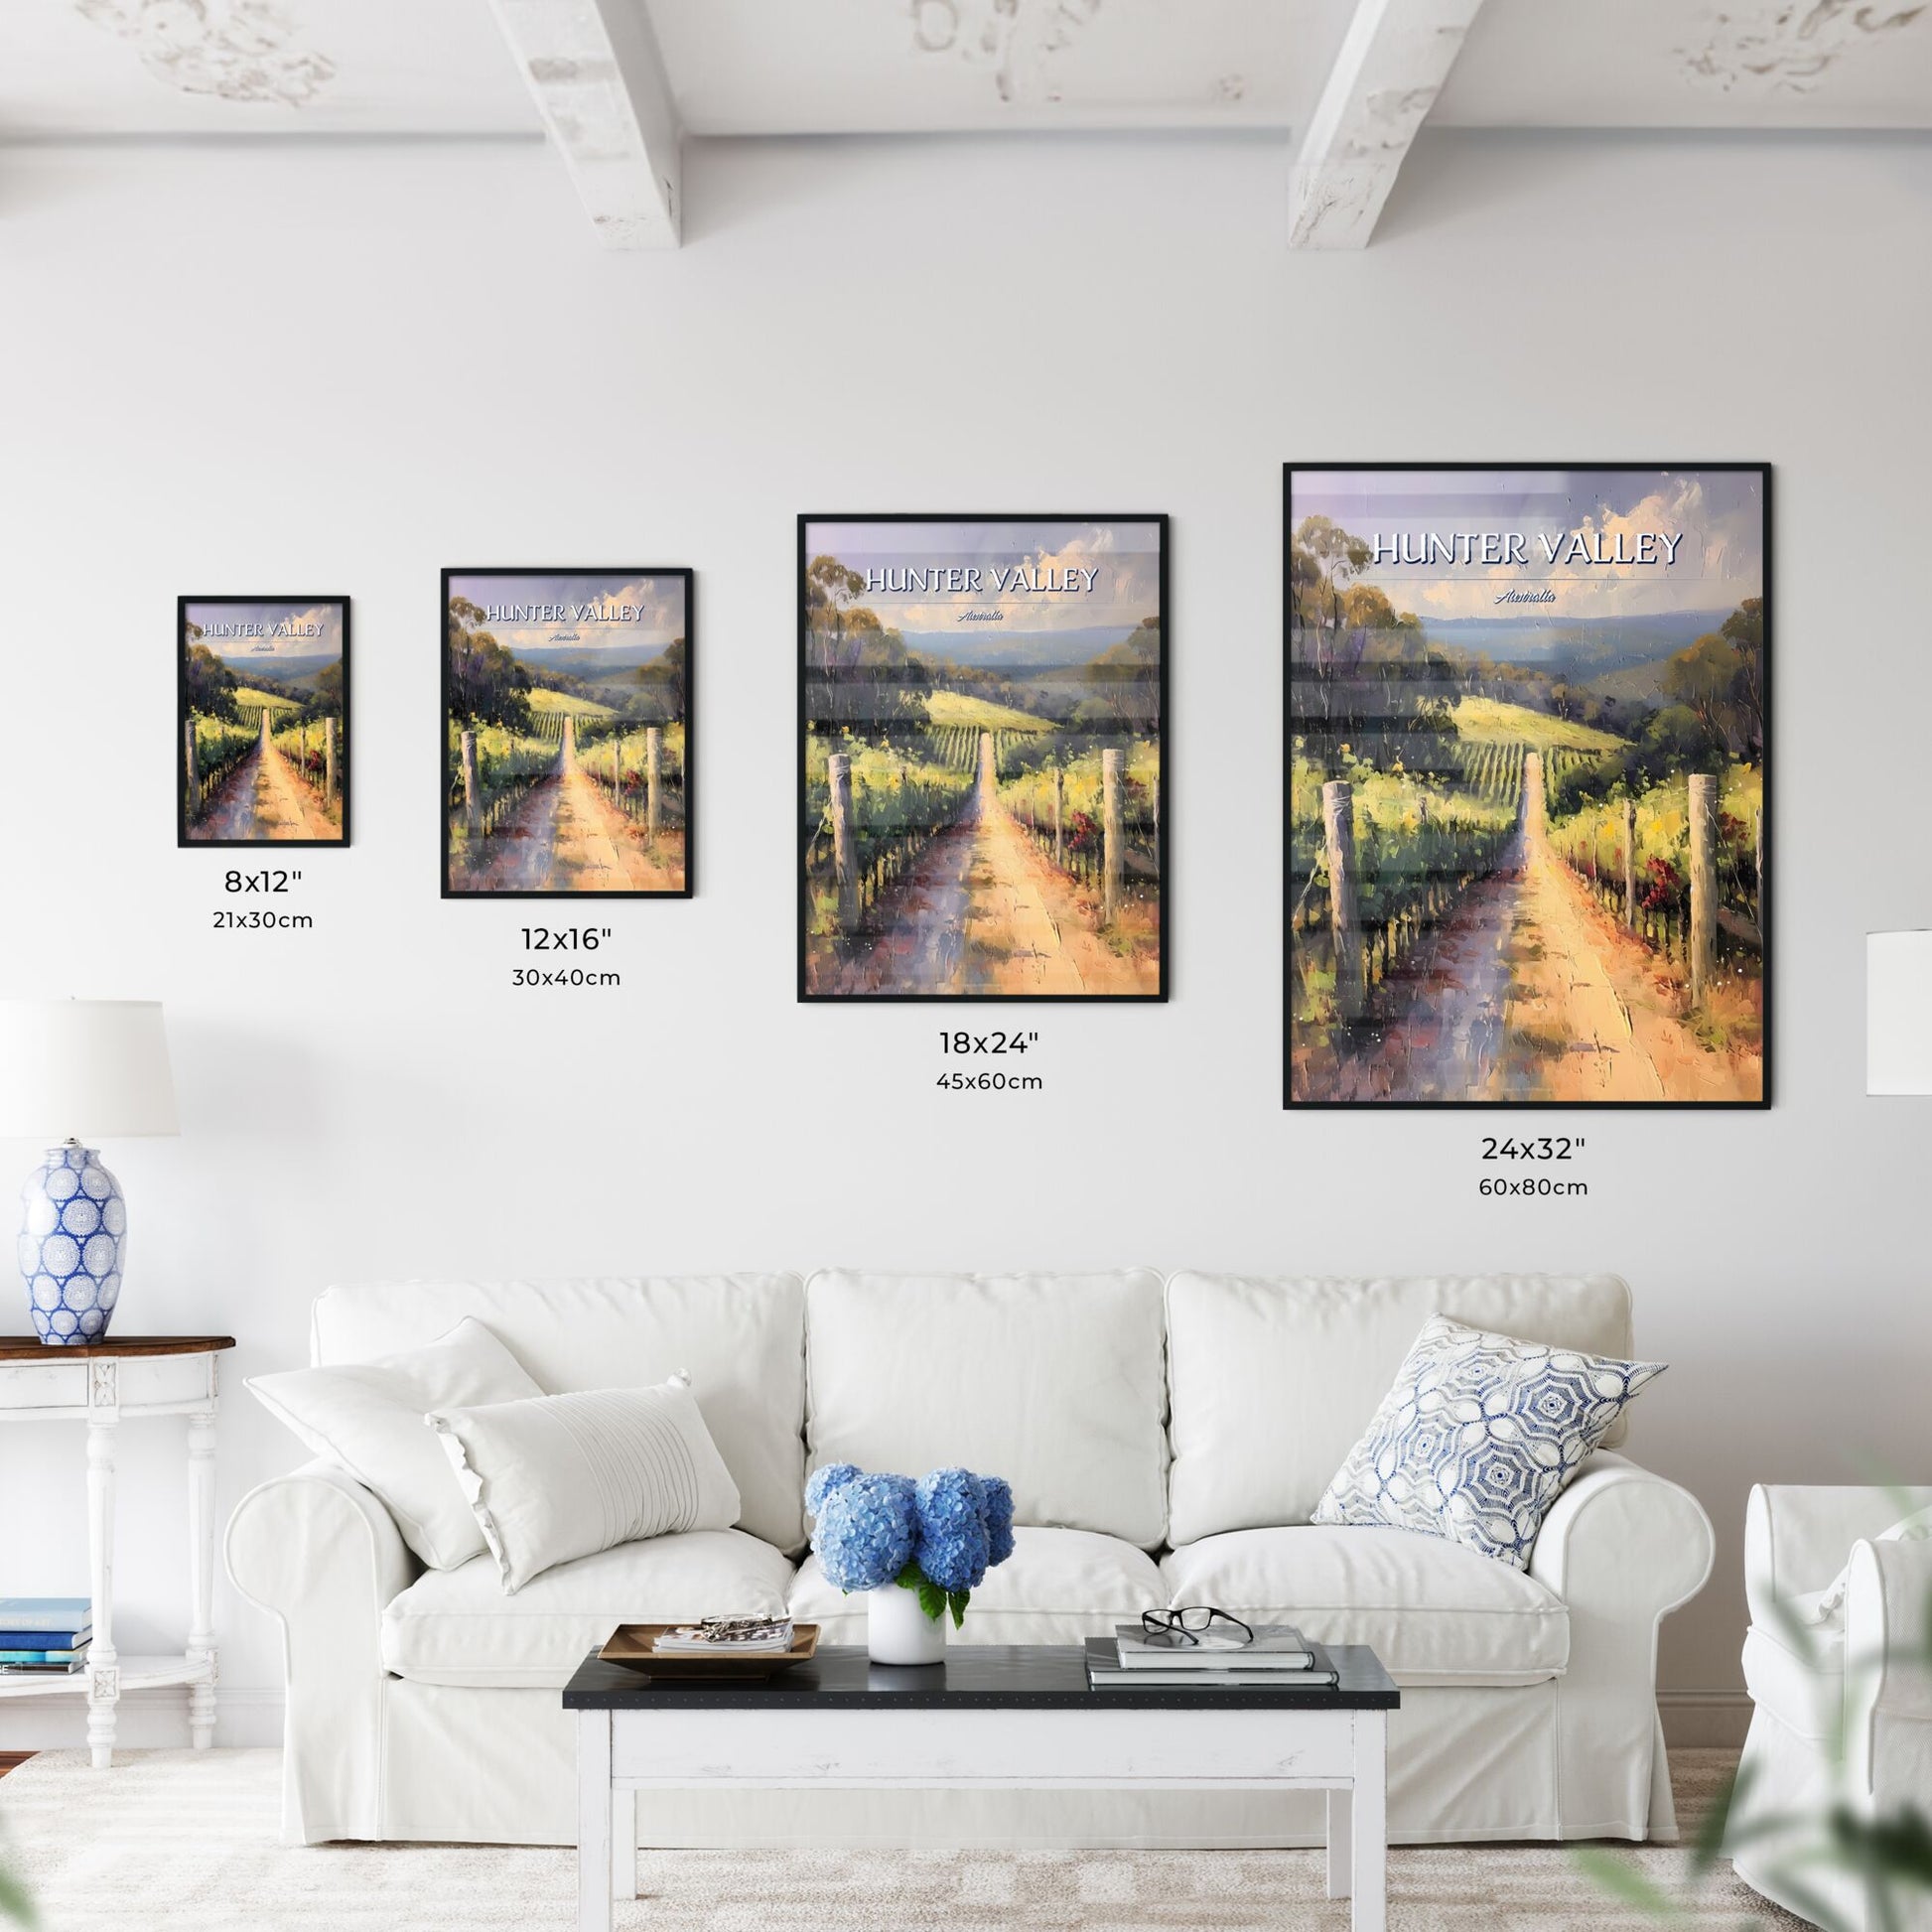 Hunter Valley, Australia - Art print of a painting of a road with rows of vines Default Title